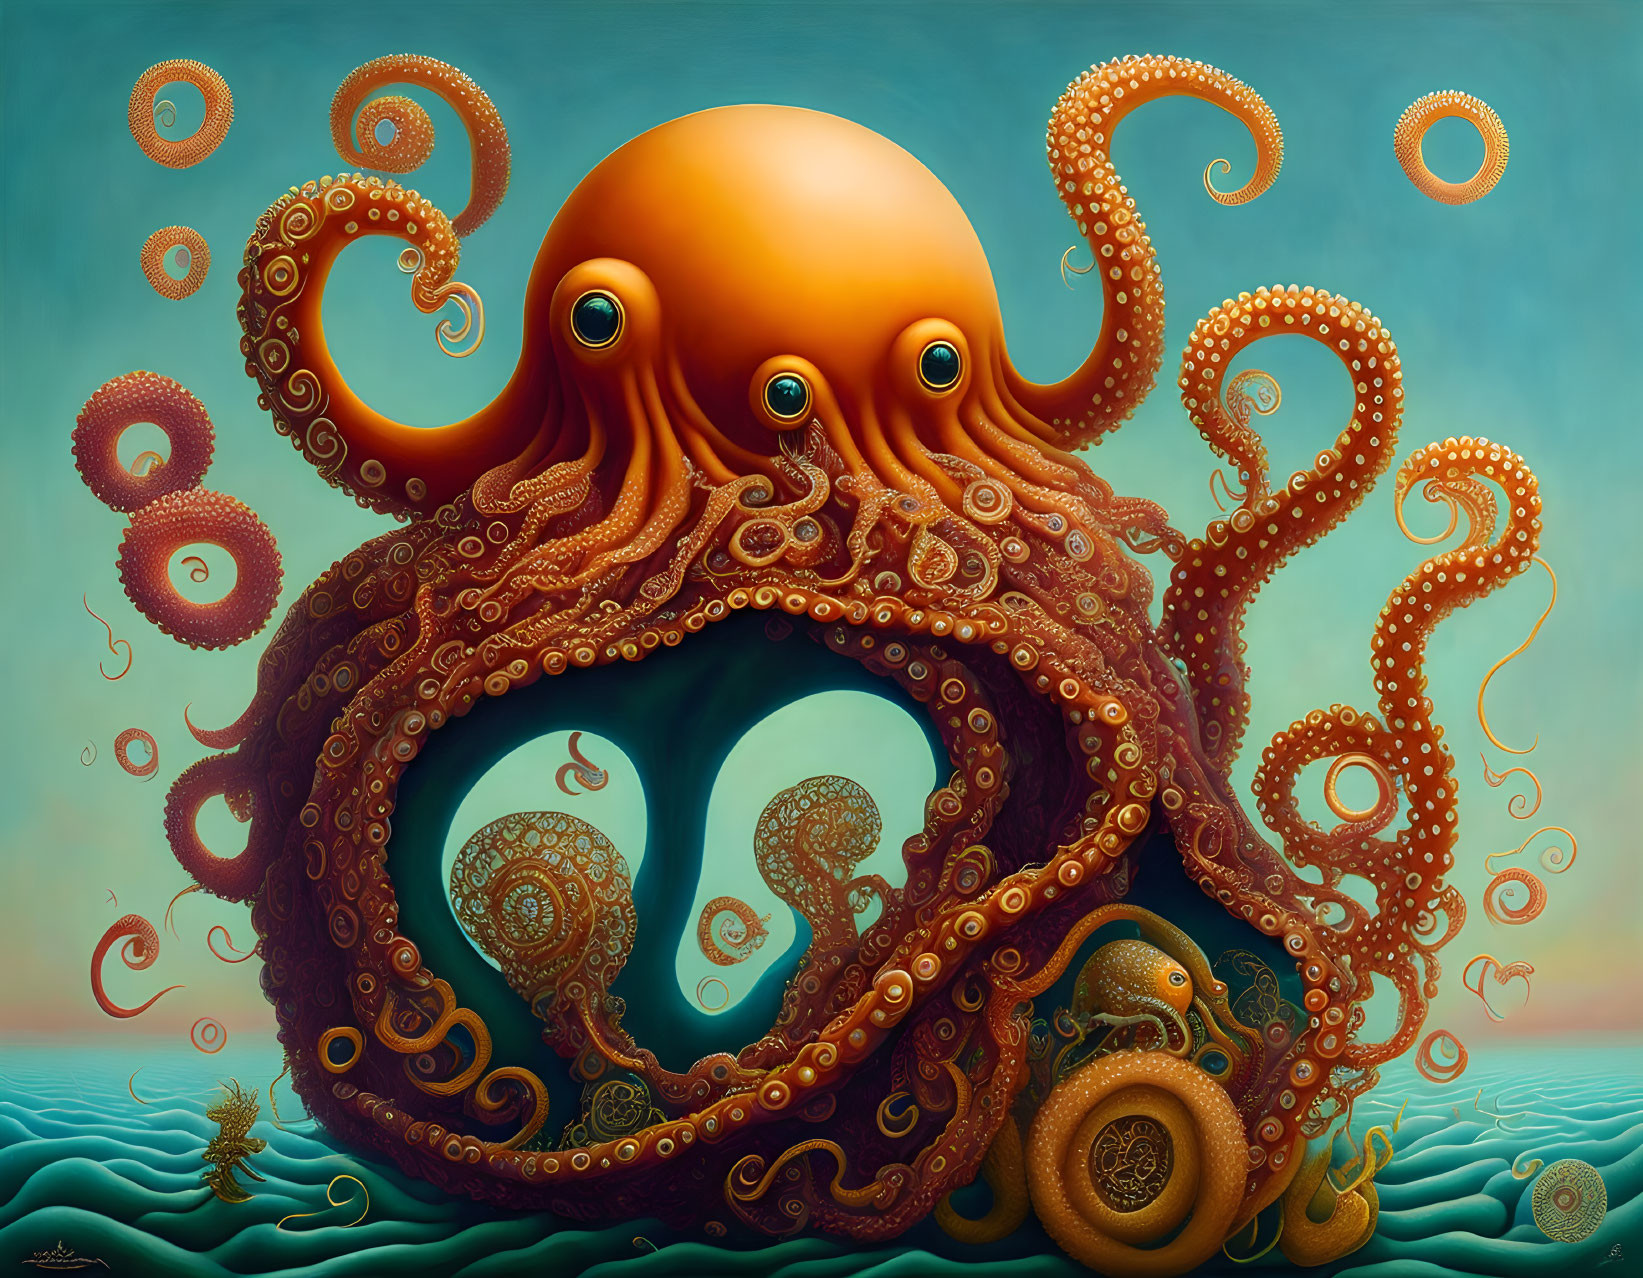 Surreal painting: Large orange octopus with intricate patterns on teal backdrop